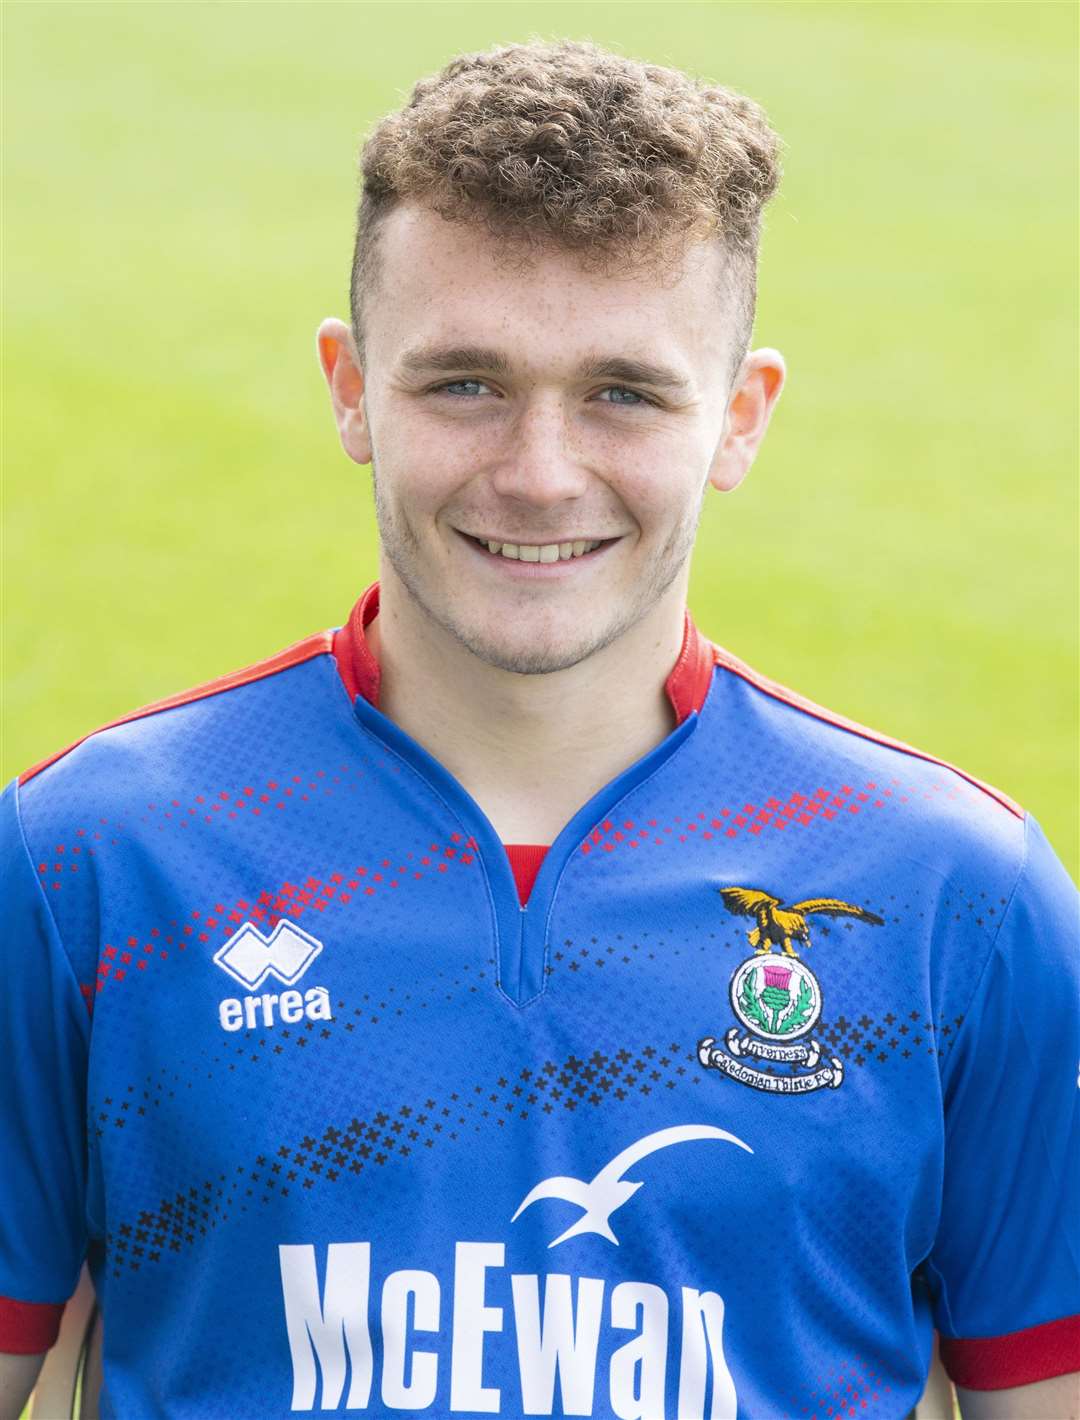 Picture - Ken Macpherson, Inverness. Inverness Caledonian Thistle Football Club. Season 2019-20. ICT's Kieran Chalmers.